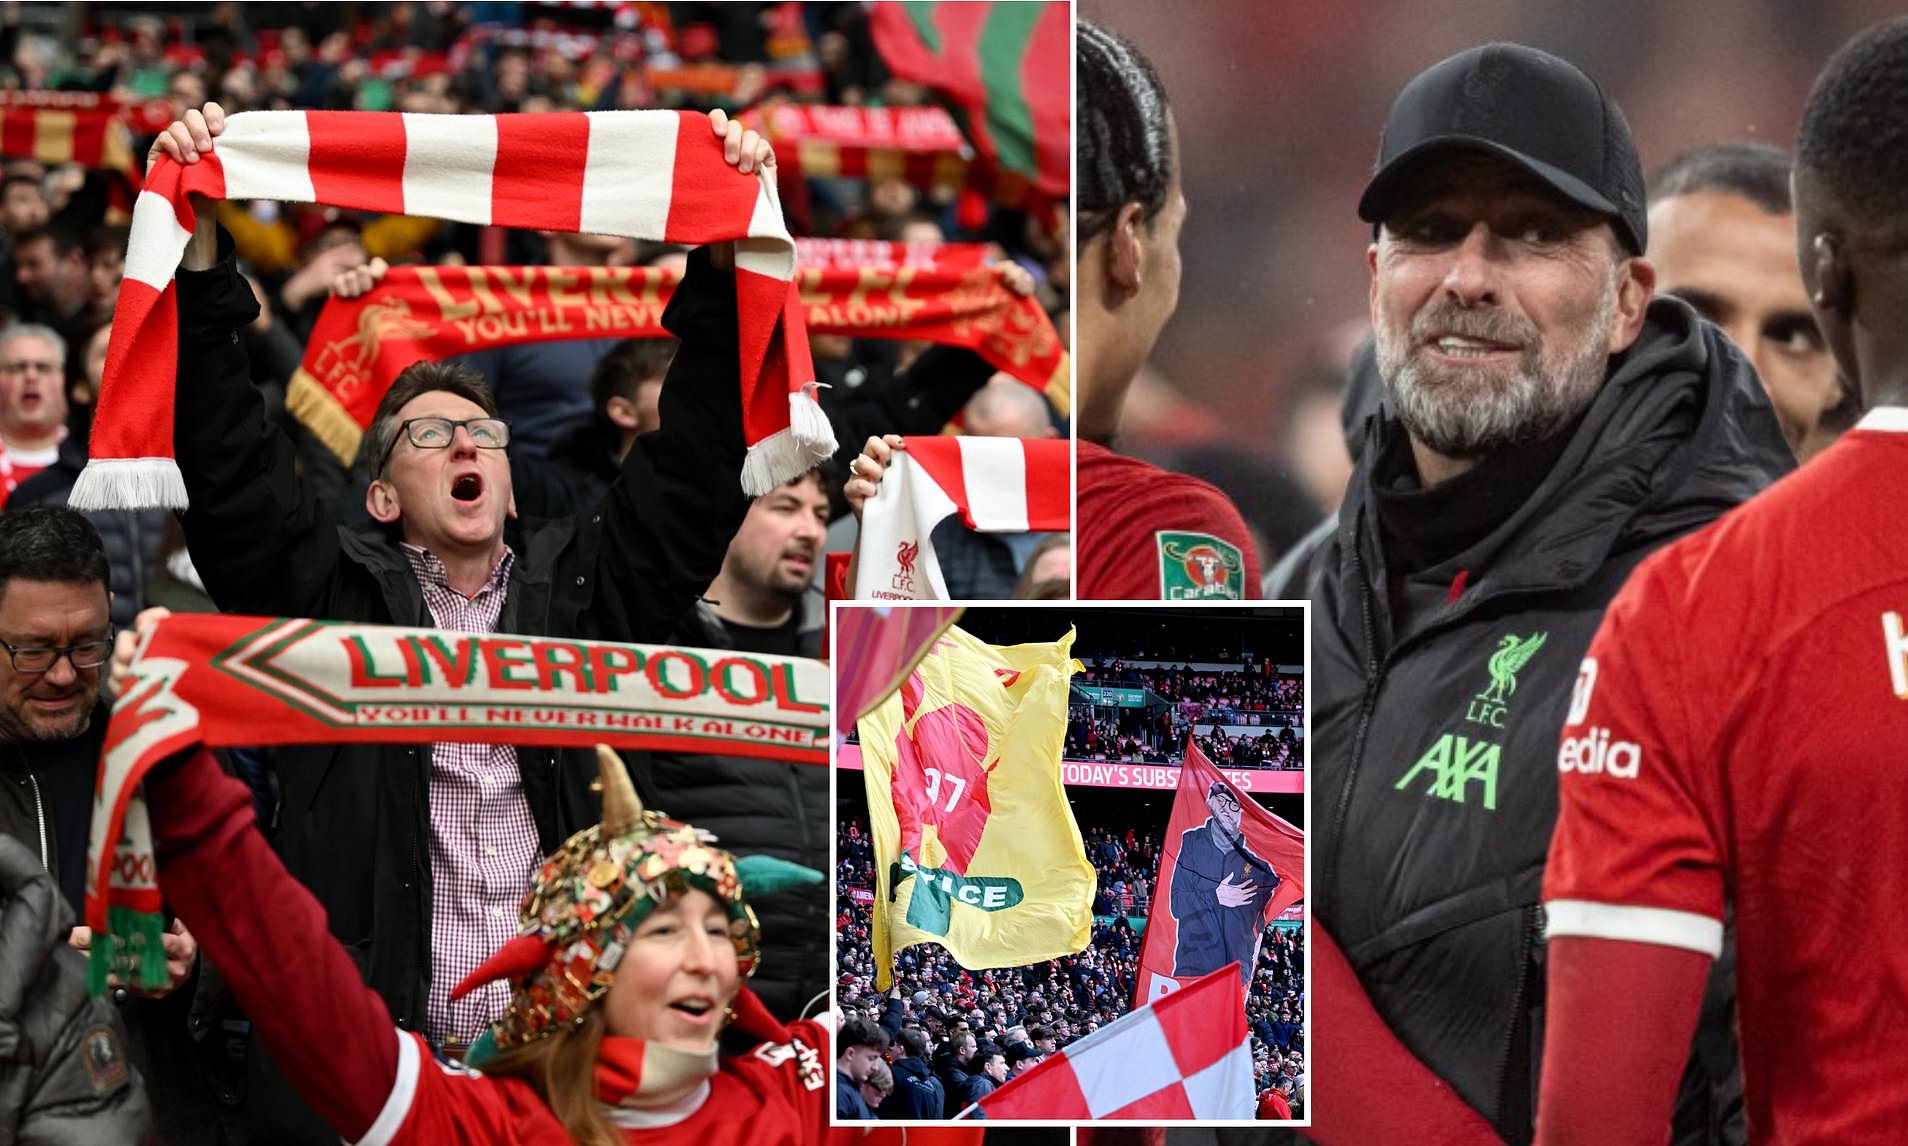 why did liverpool fans boo the national anthem at wembley?